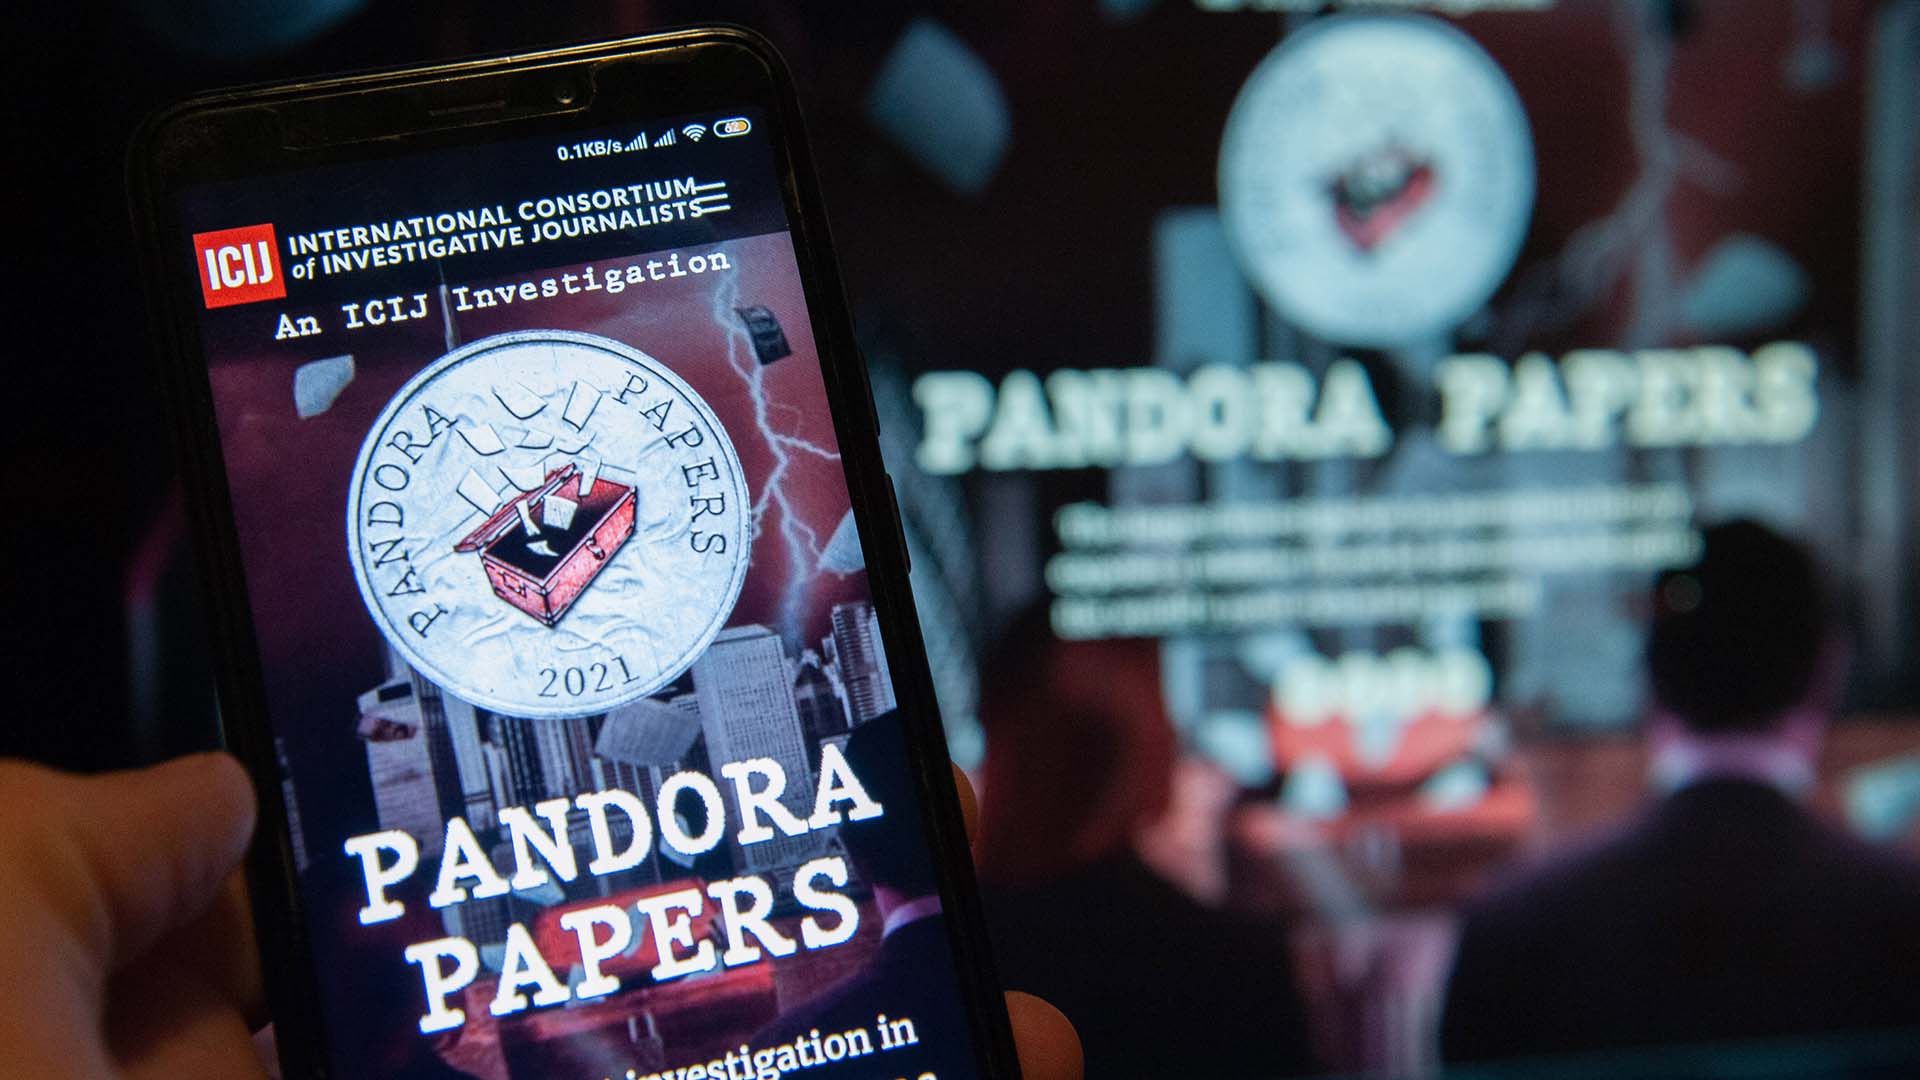 Pandora Papers on screen